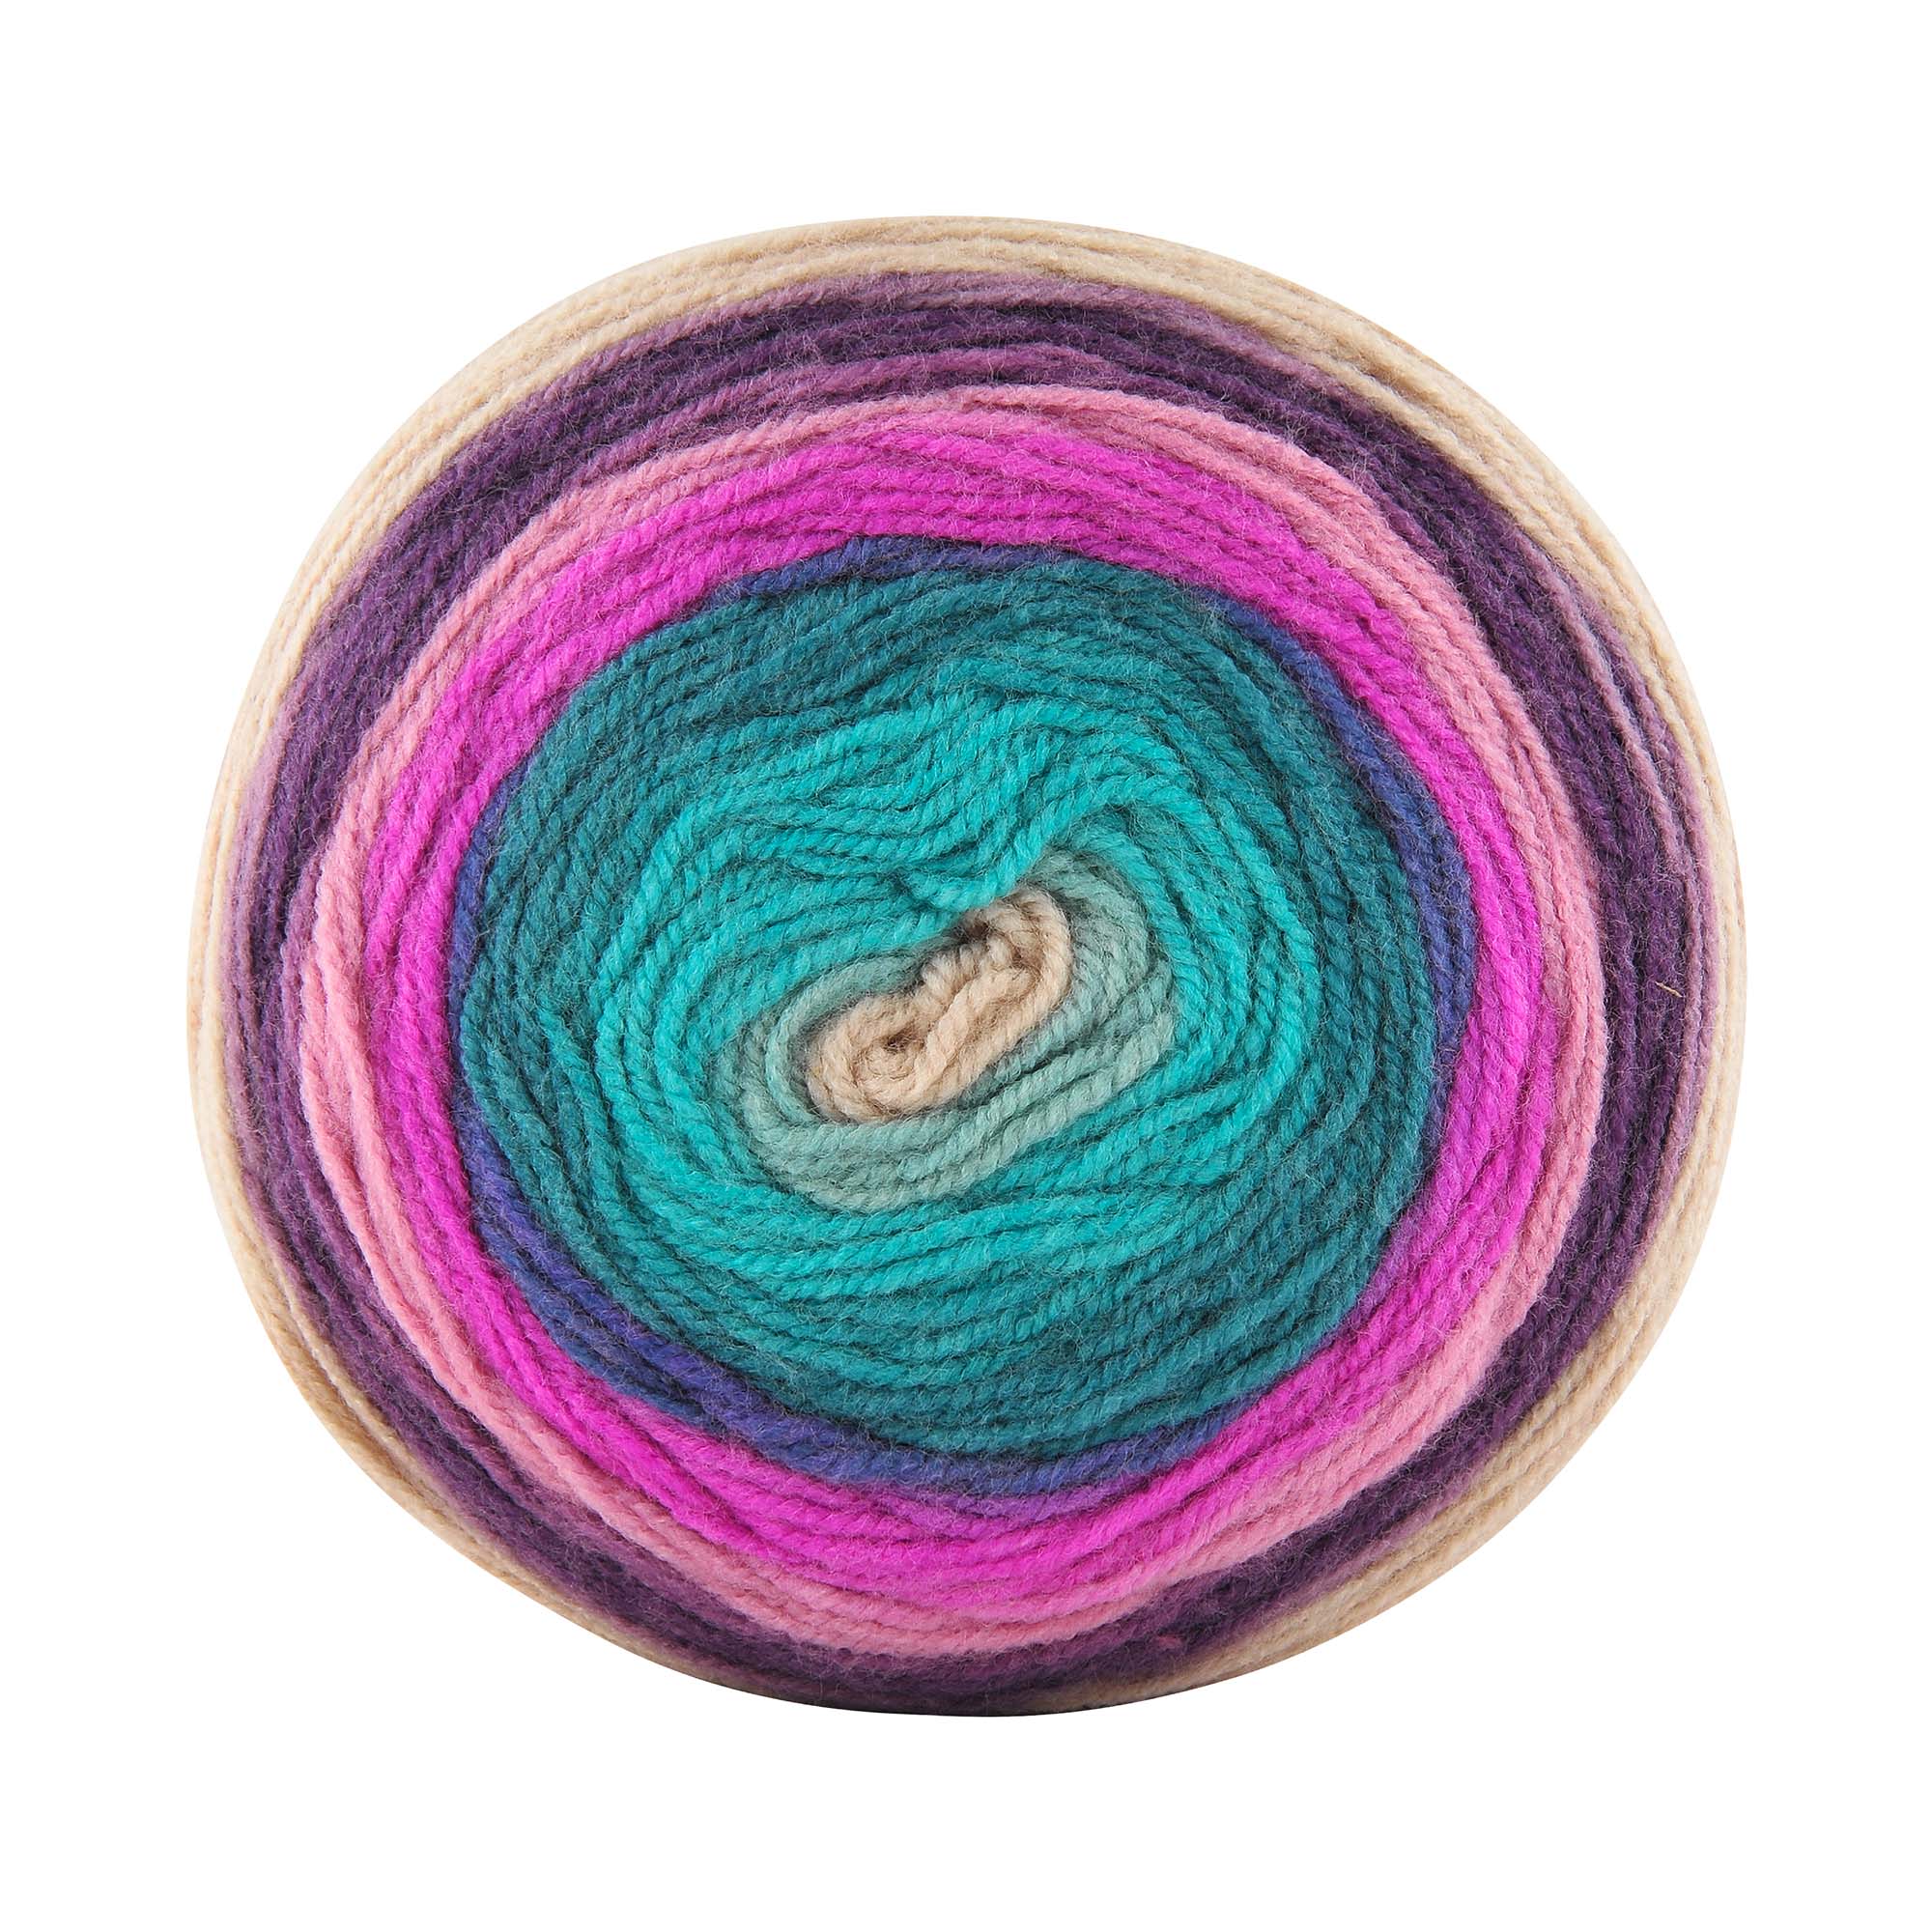 Beautiful Cake Yarns for Your Crochet and Knitting Projects